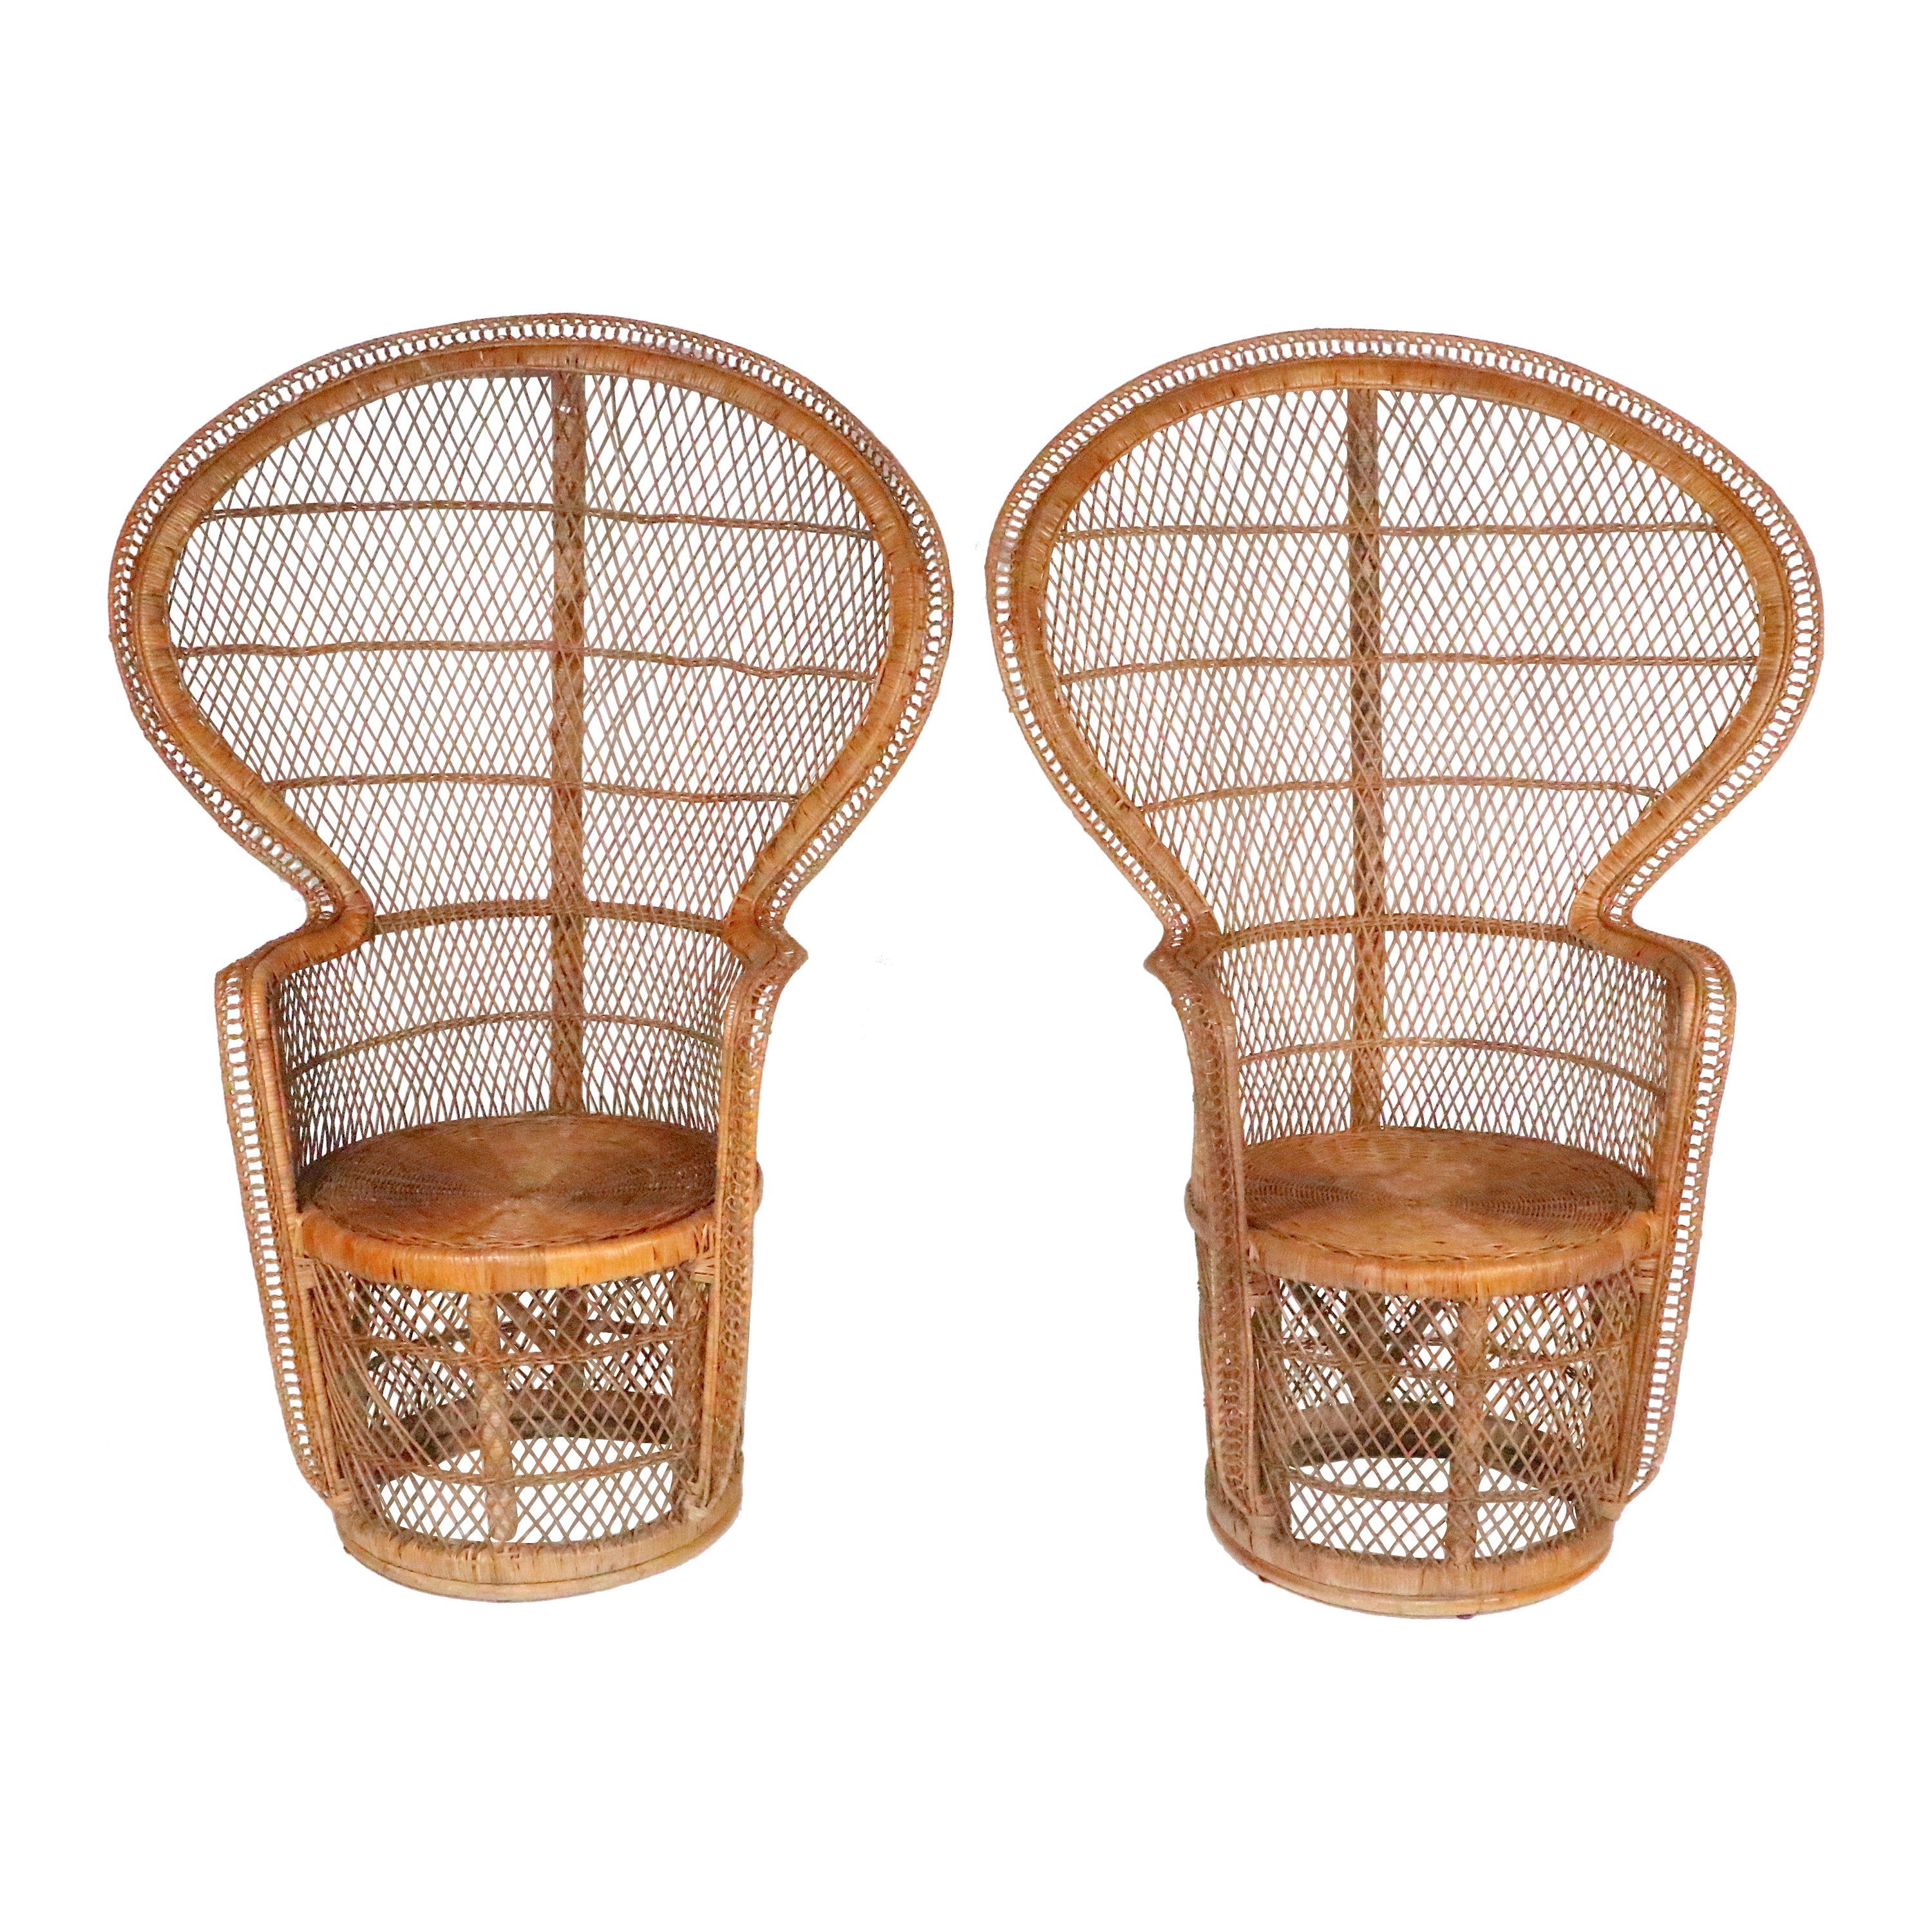 Pr. Vintage Emanuelle Peacock Woven Wicker  Chairs c. 1970's For Sale